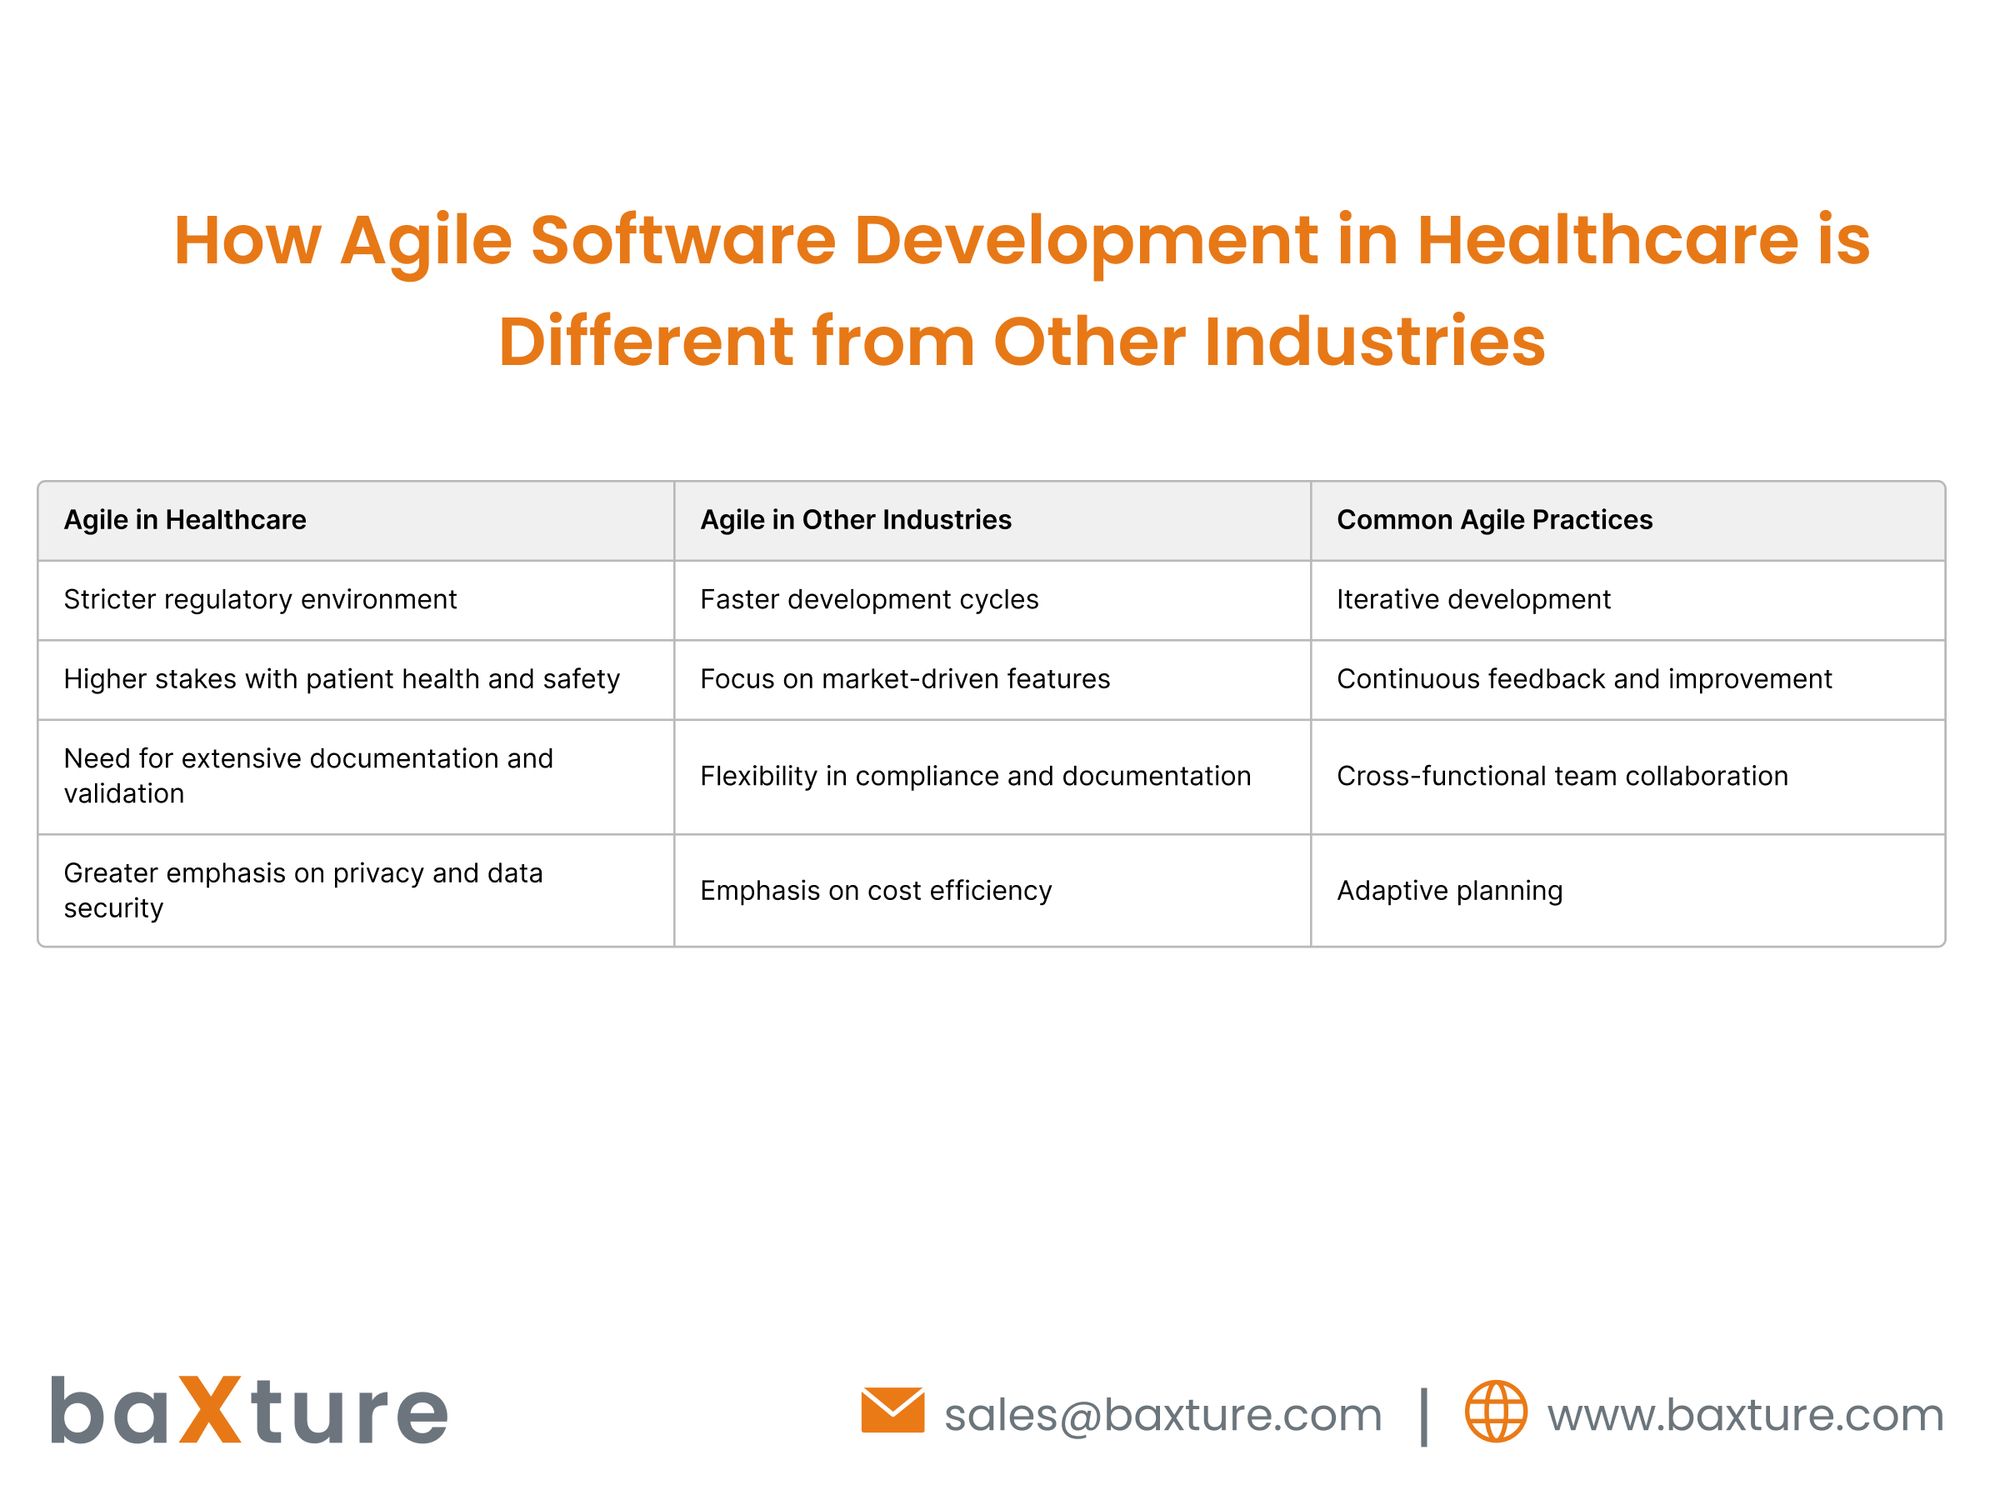 difference between Agile Software Development in Healthcare & Other Industries